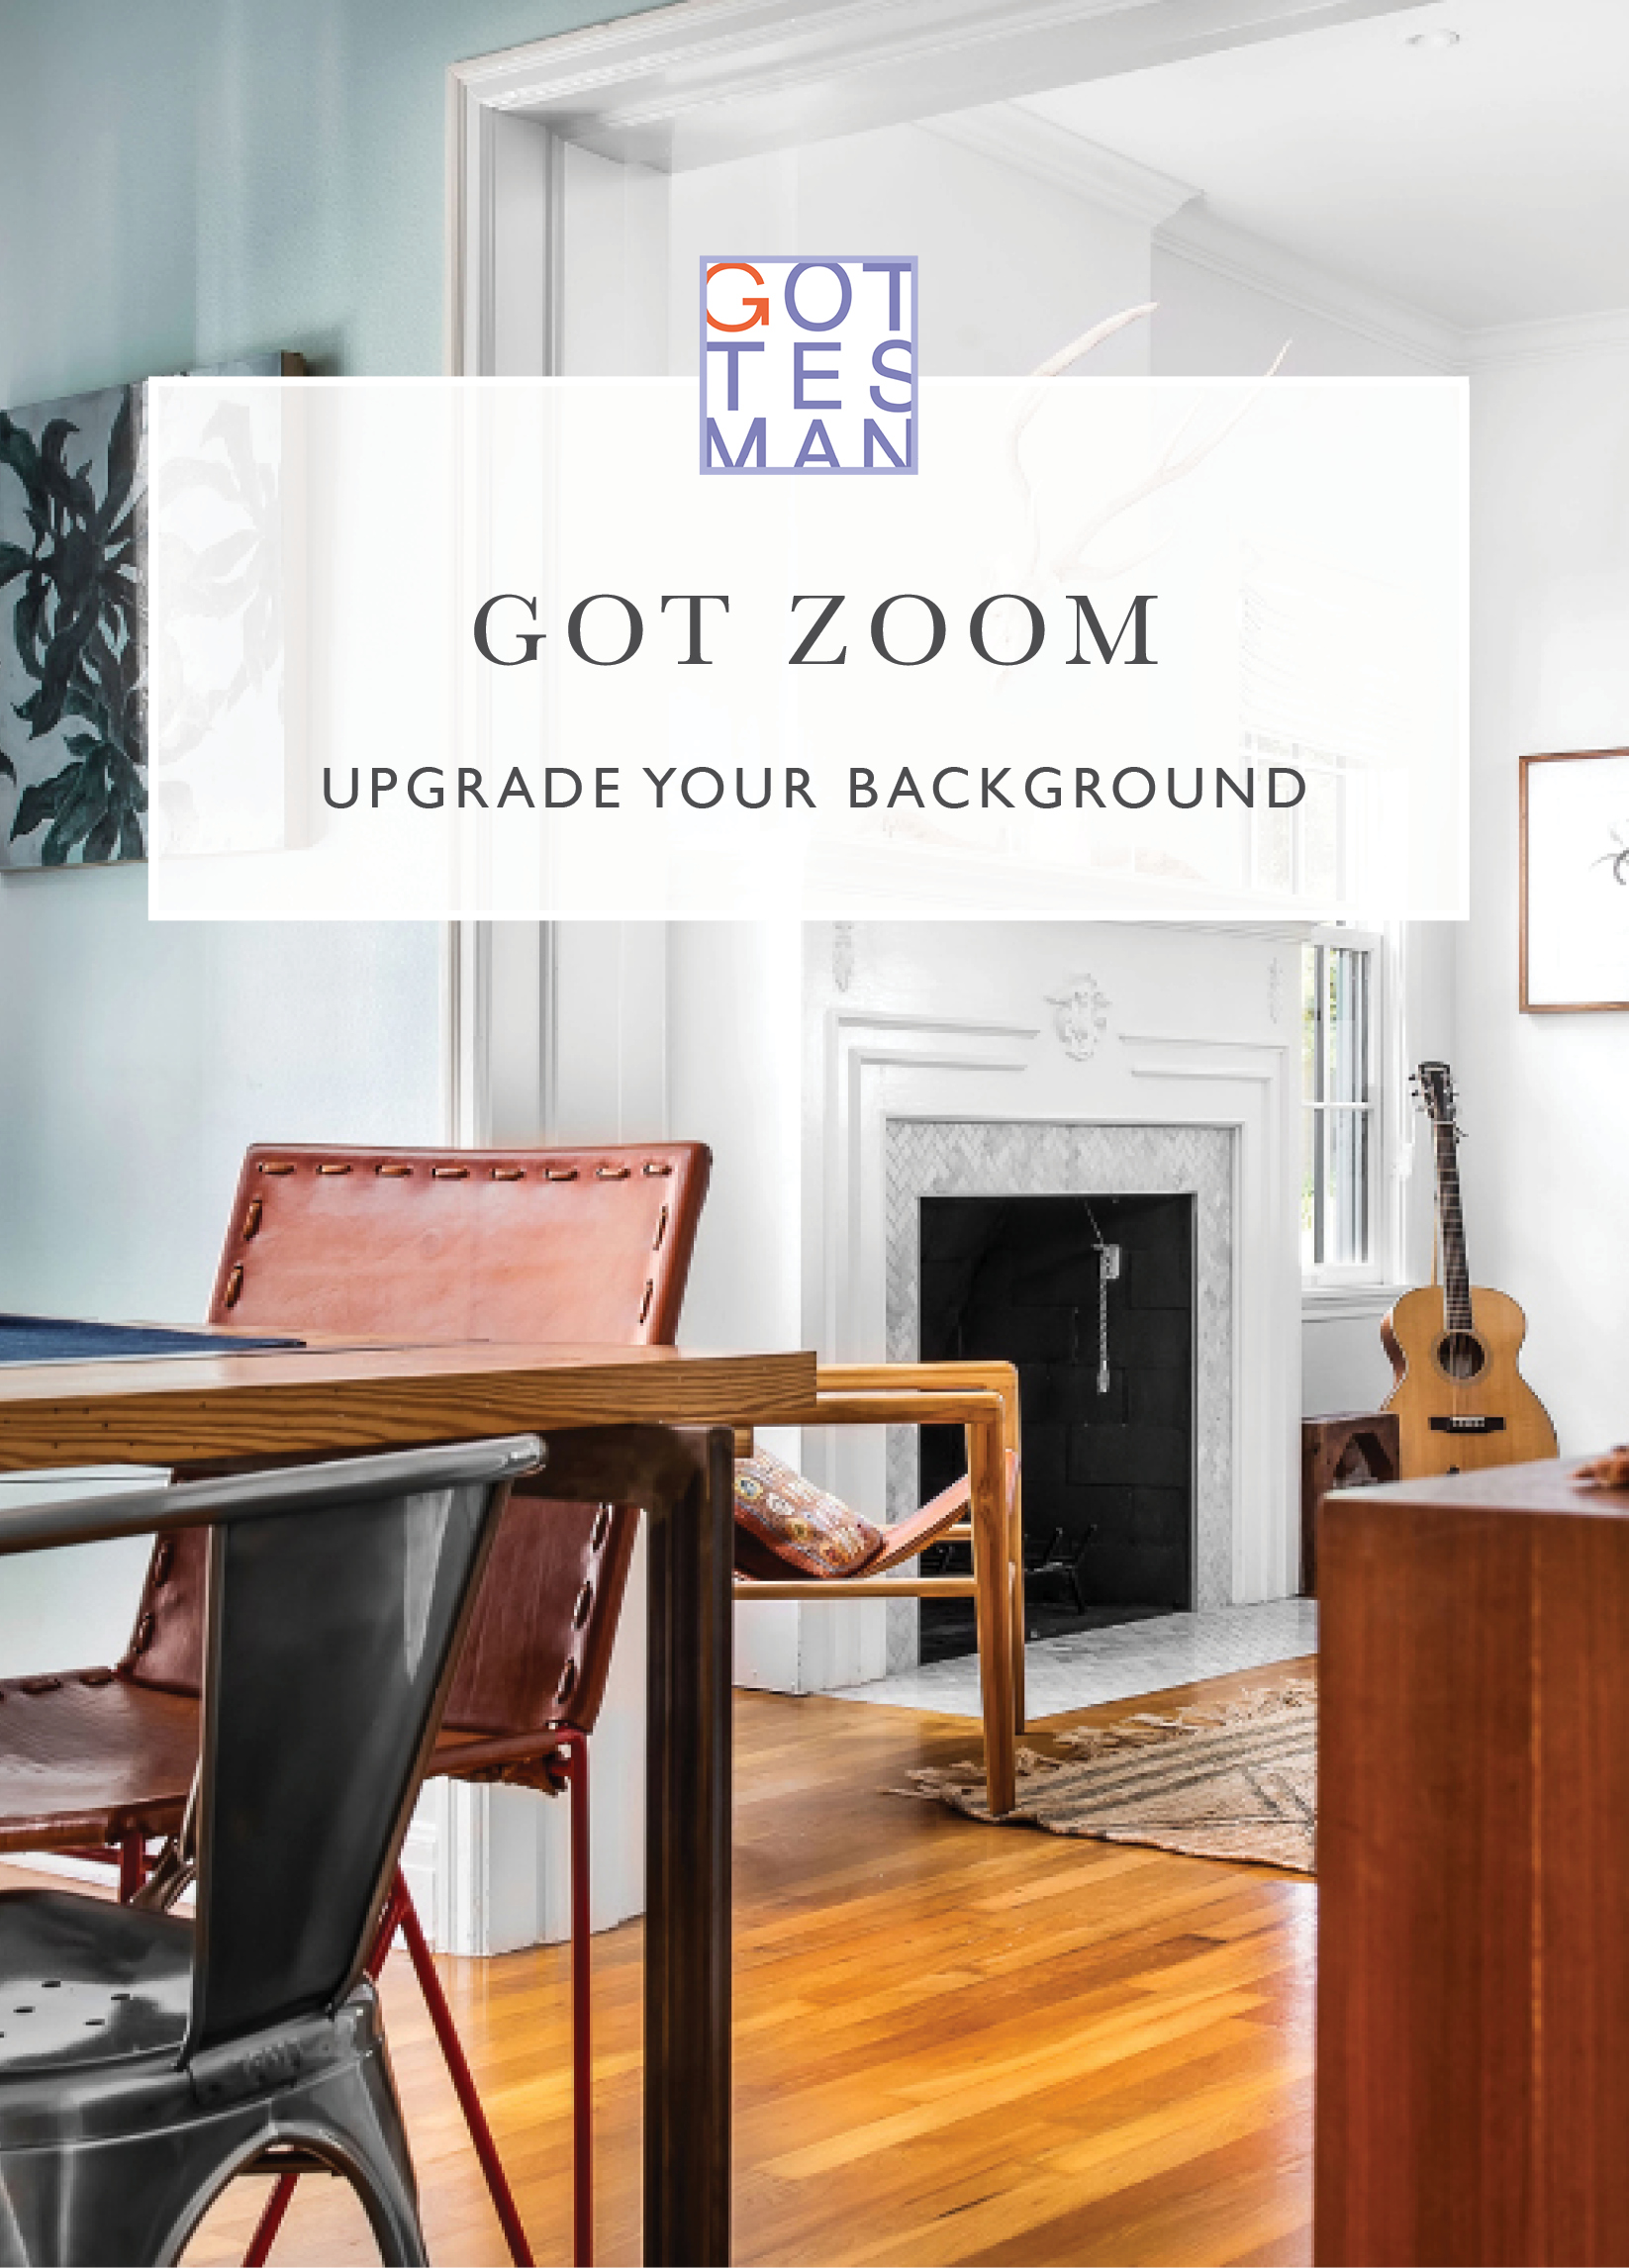 House with text overlay, "Got Zoom: Upgrade Your Background"